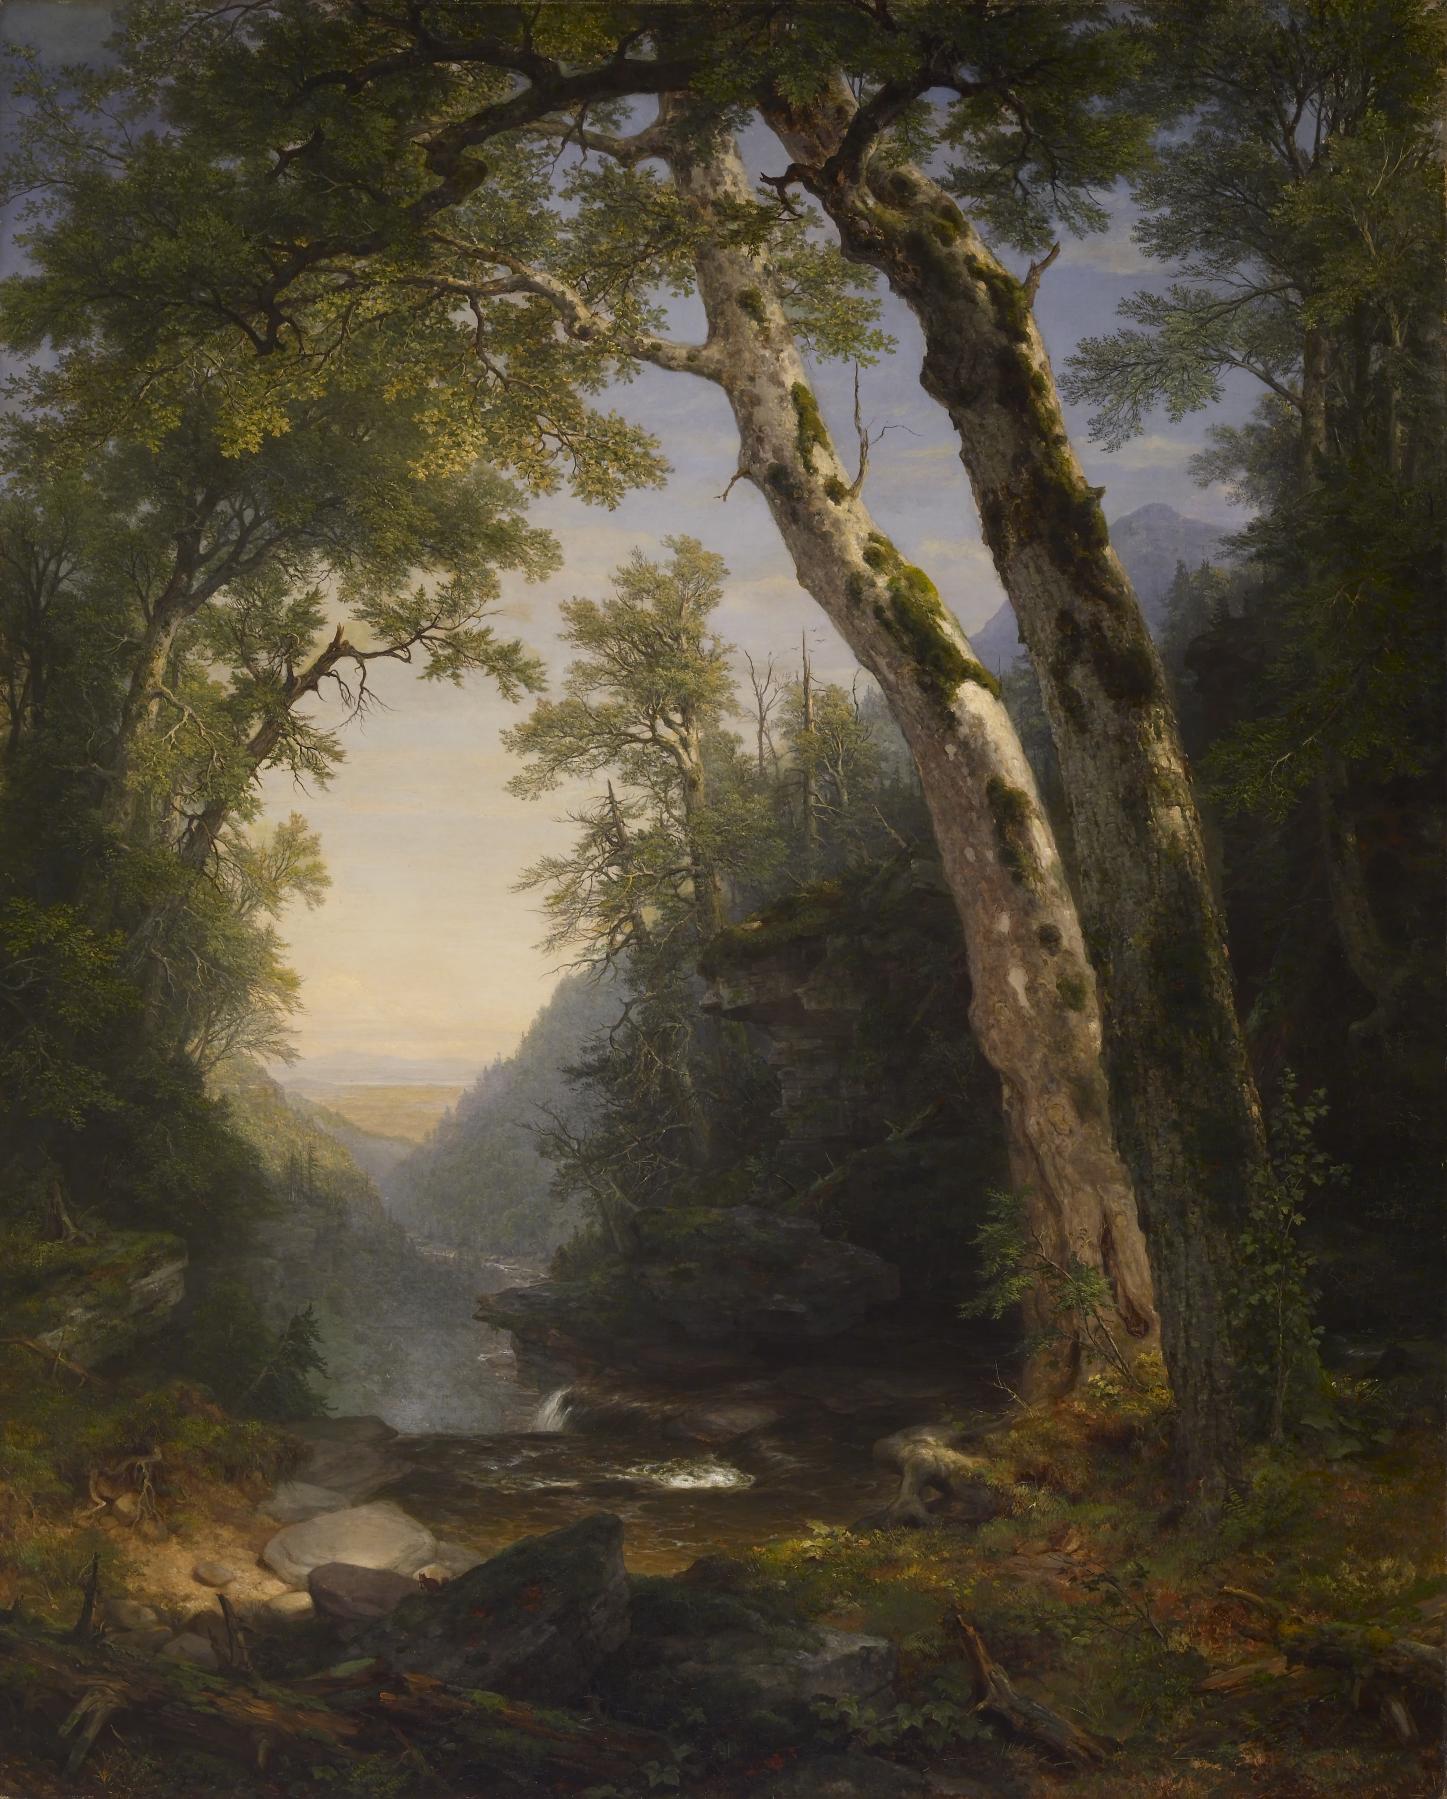 Les Catskills, 1859 - Asher Brown Durand